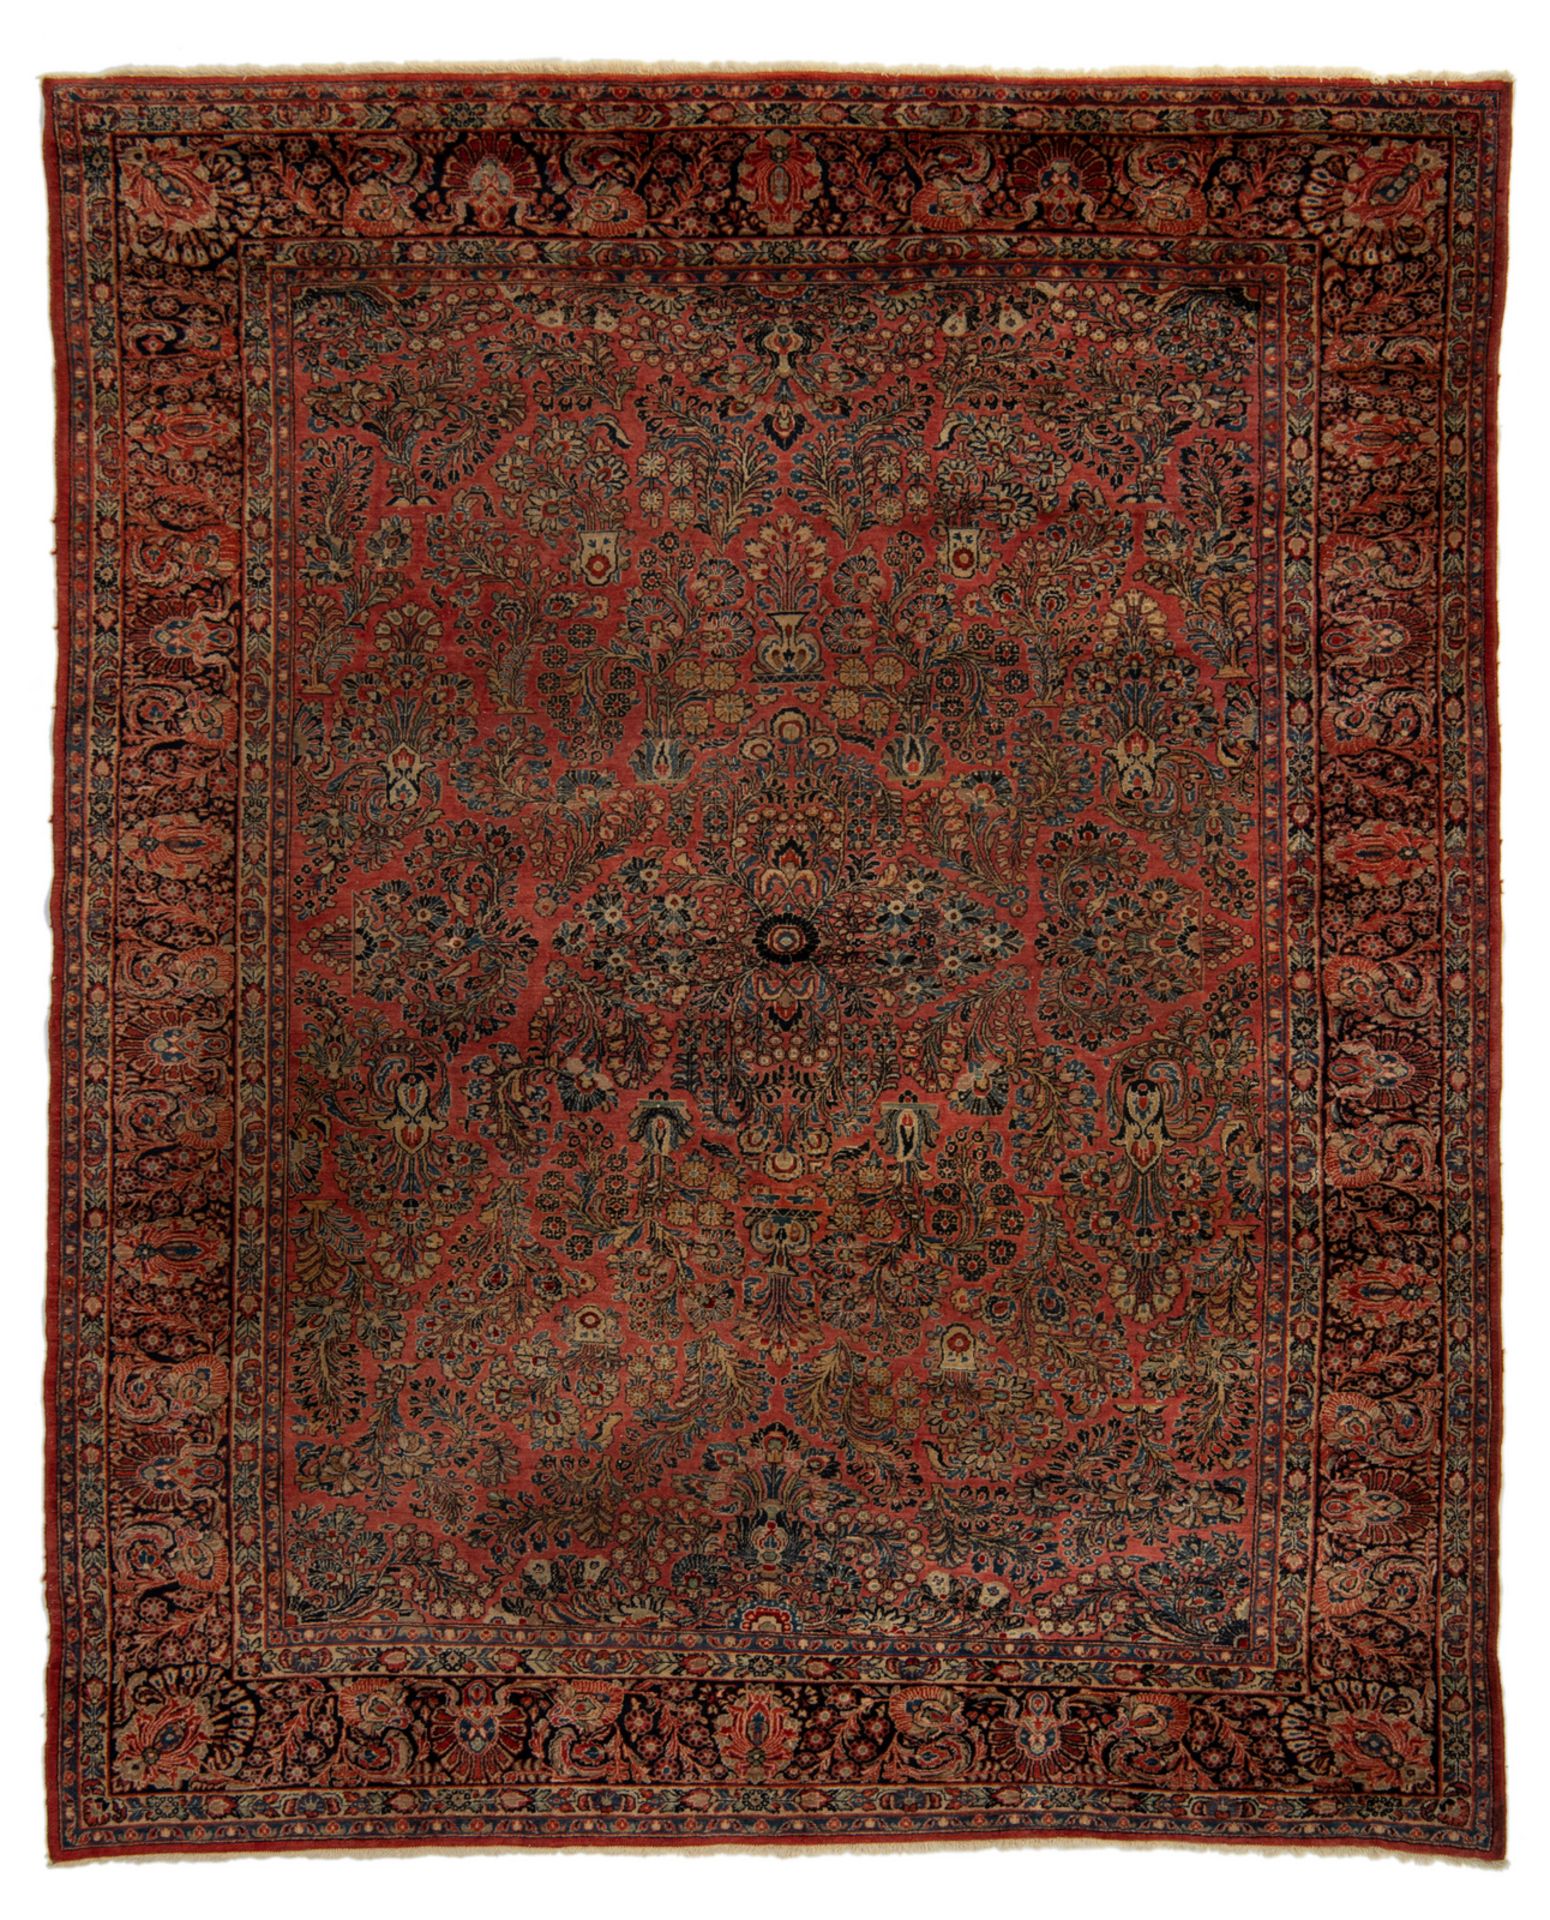 An Oriental rug, decorated with floral motifs, wool on cotton, Sarough, 271 x 345 cm